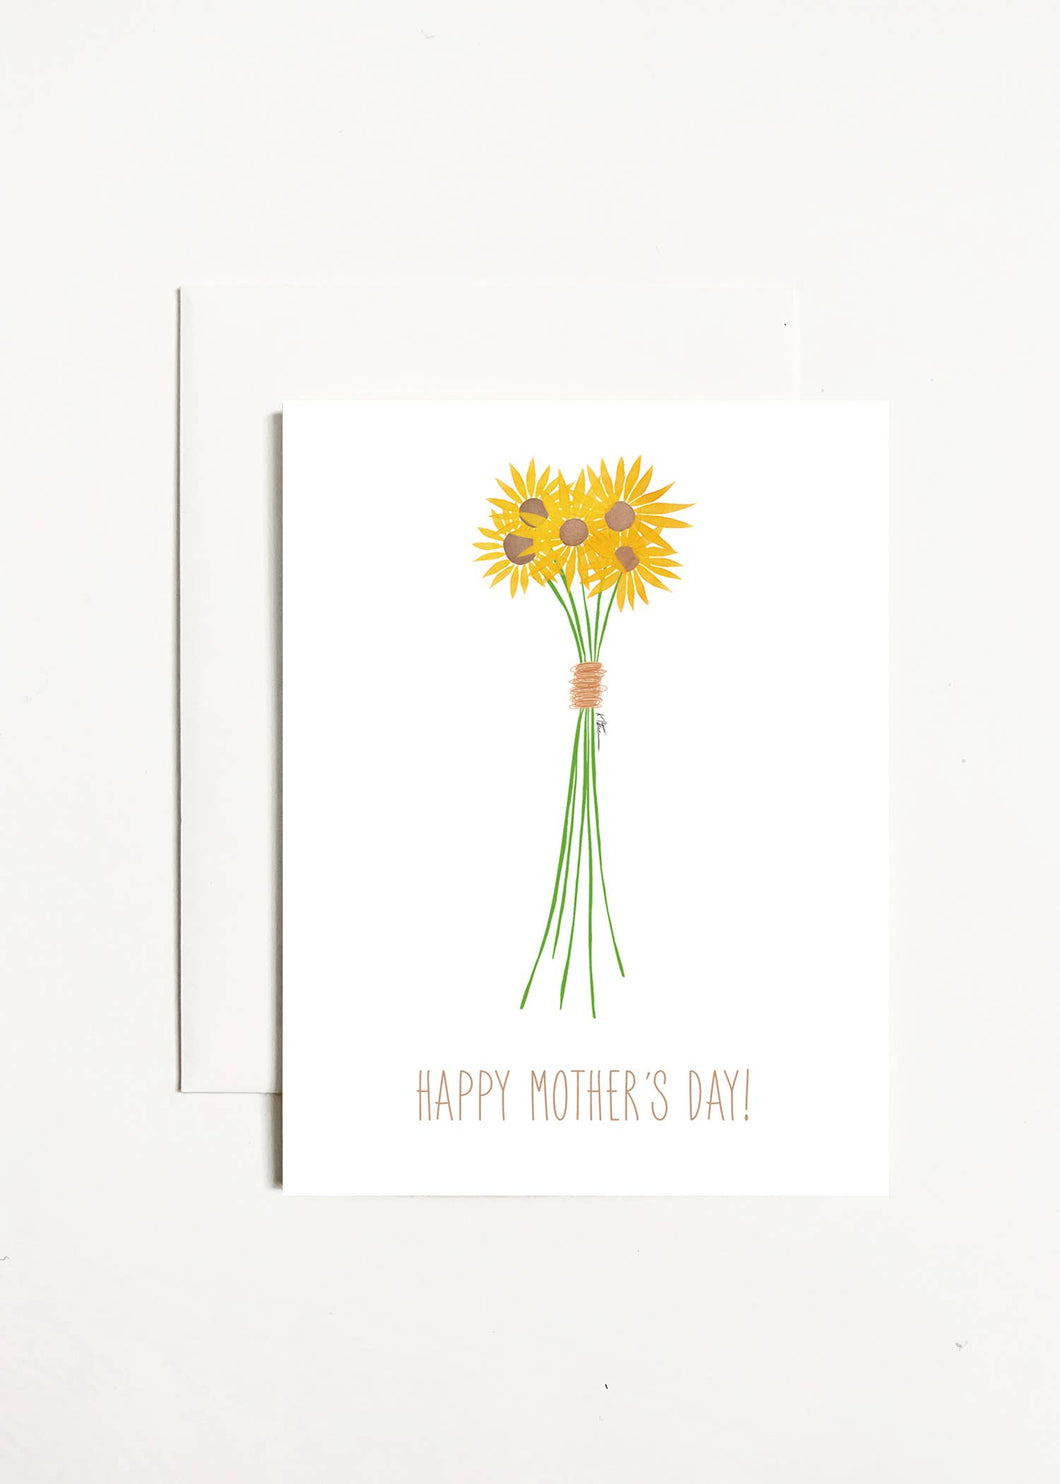 Happy Mother's Day! - Sunflowers